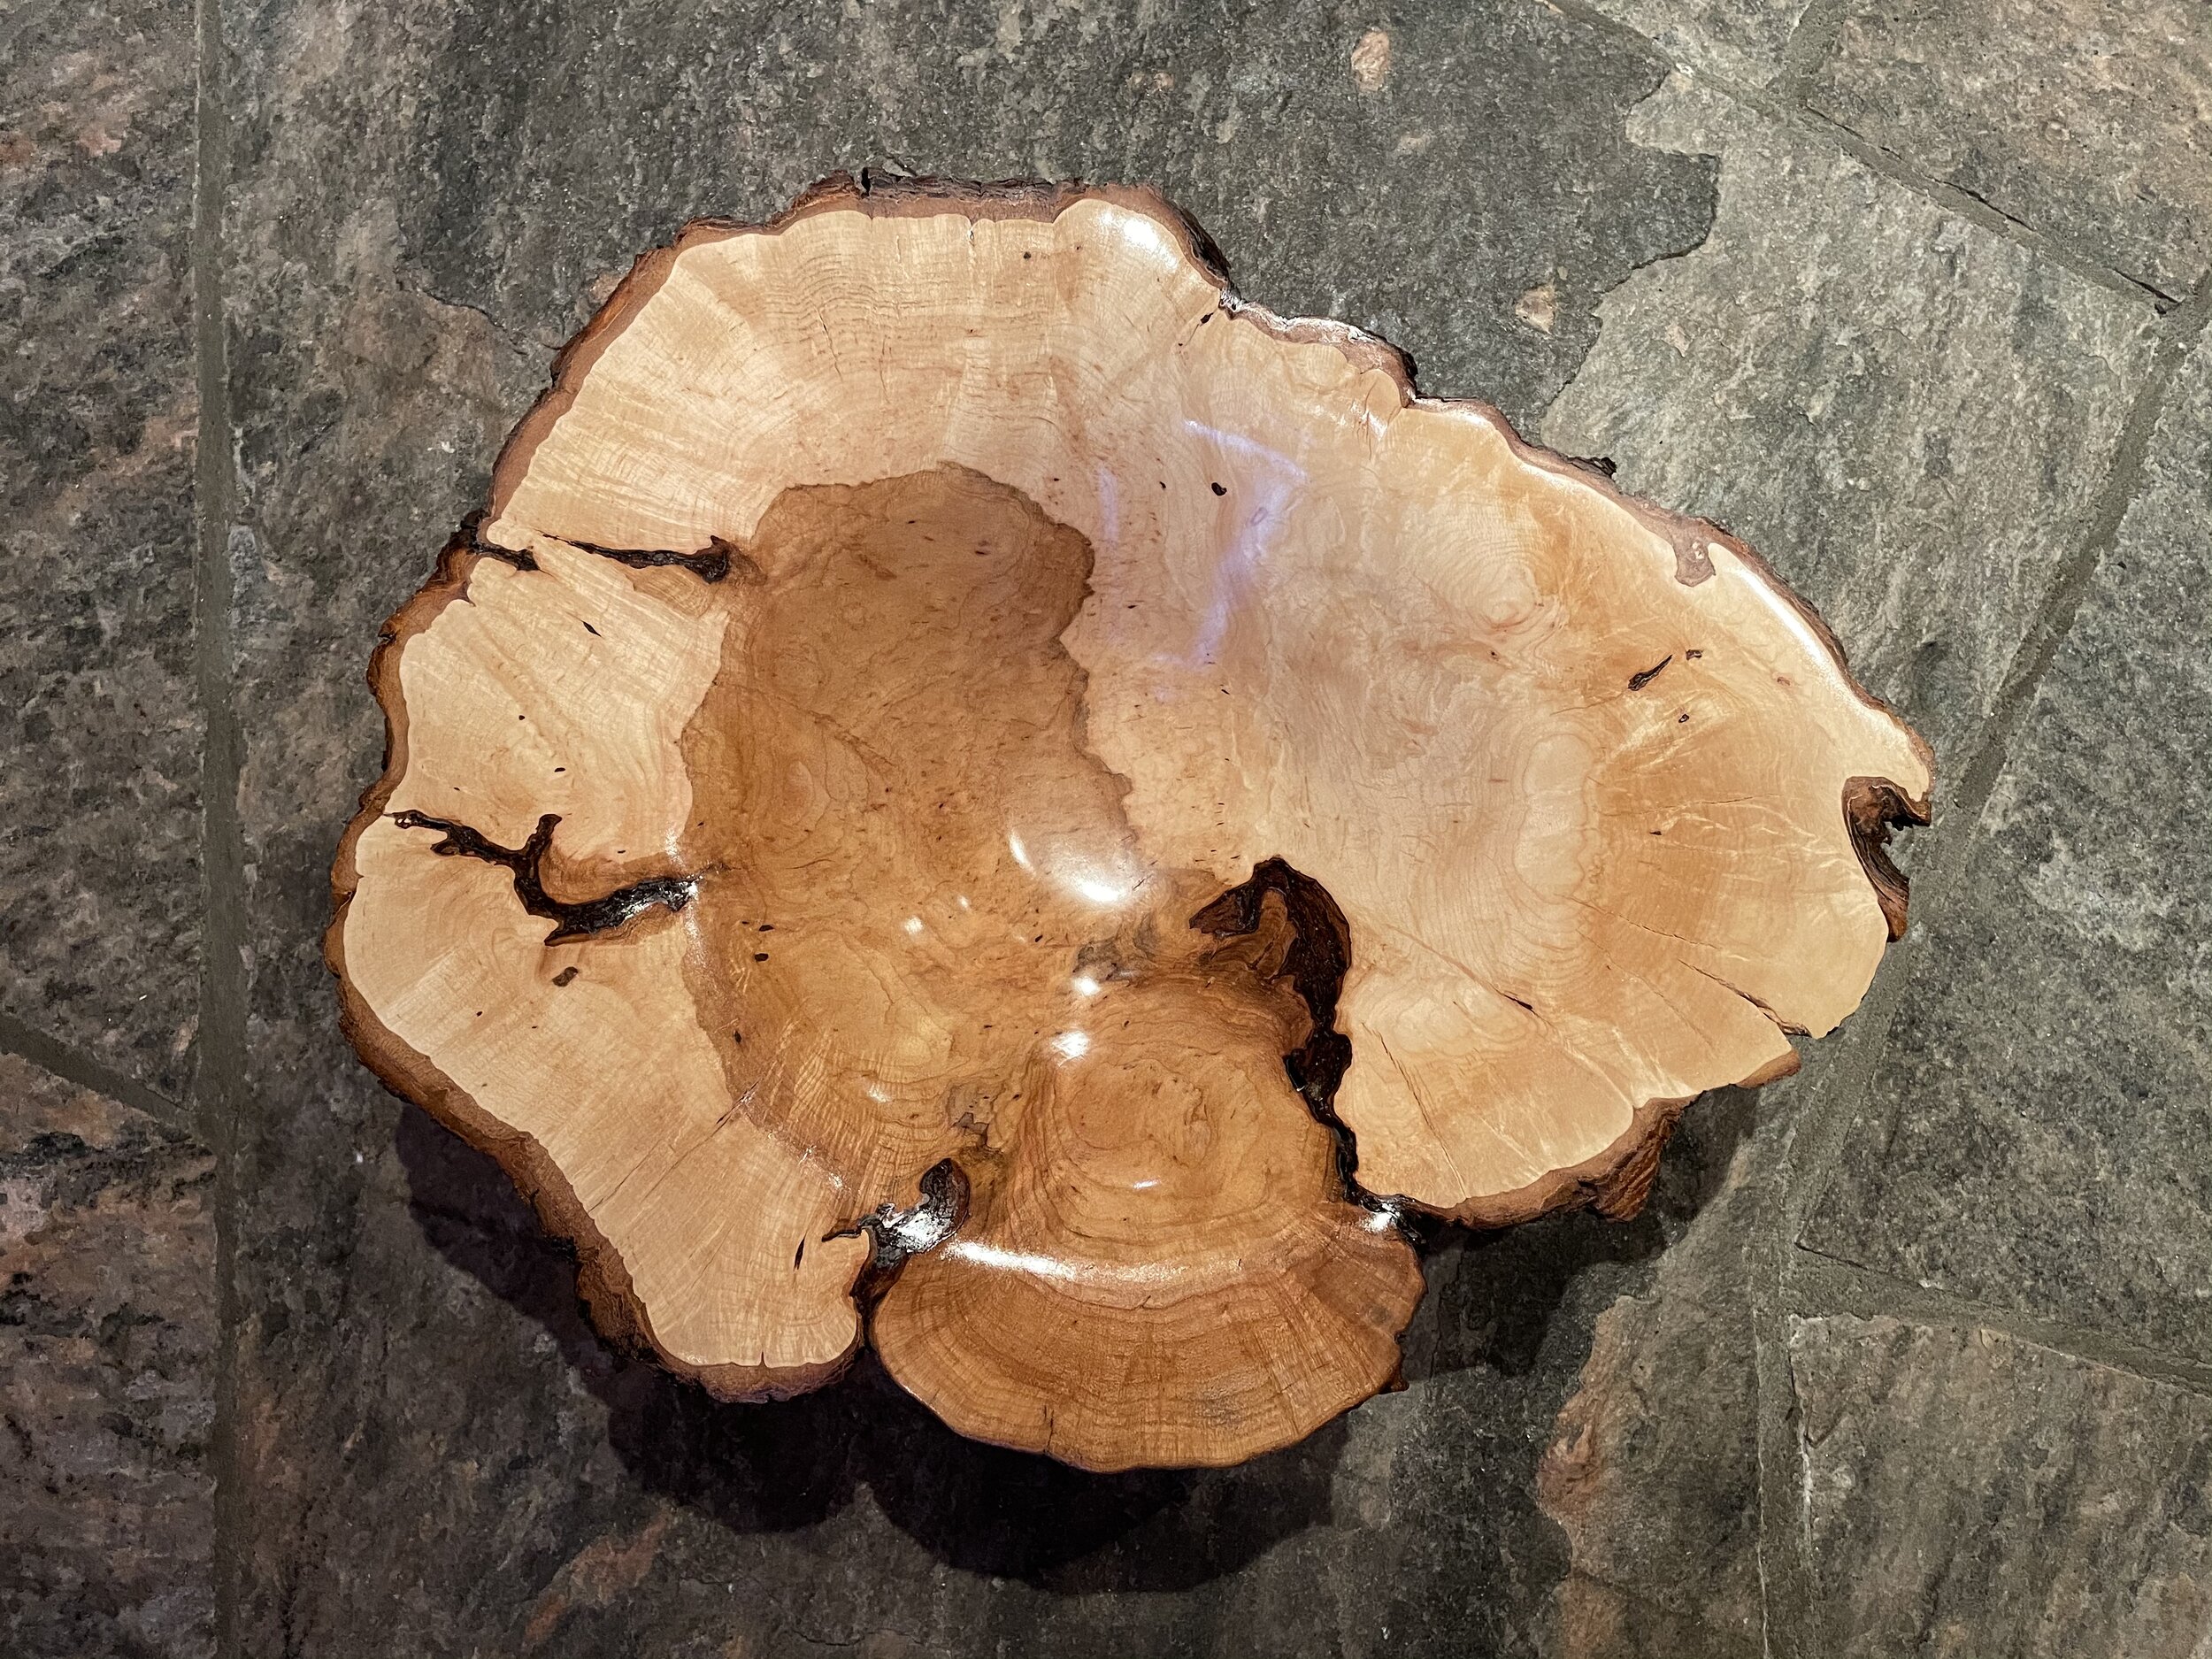  This Sugar Maple Burl Bowl displays dramatic marbling of colour, complex figuring and a lustrous food-safe finish.  17” round x 4.5” high, $600 